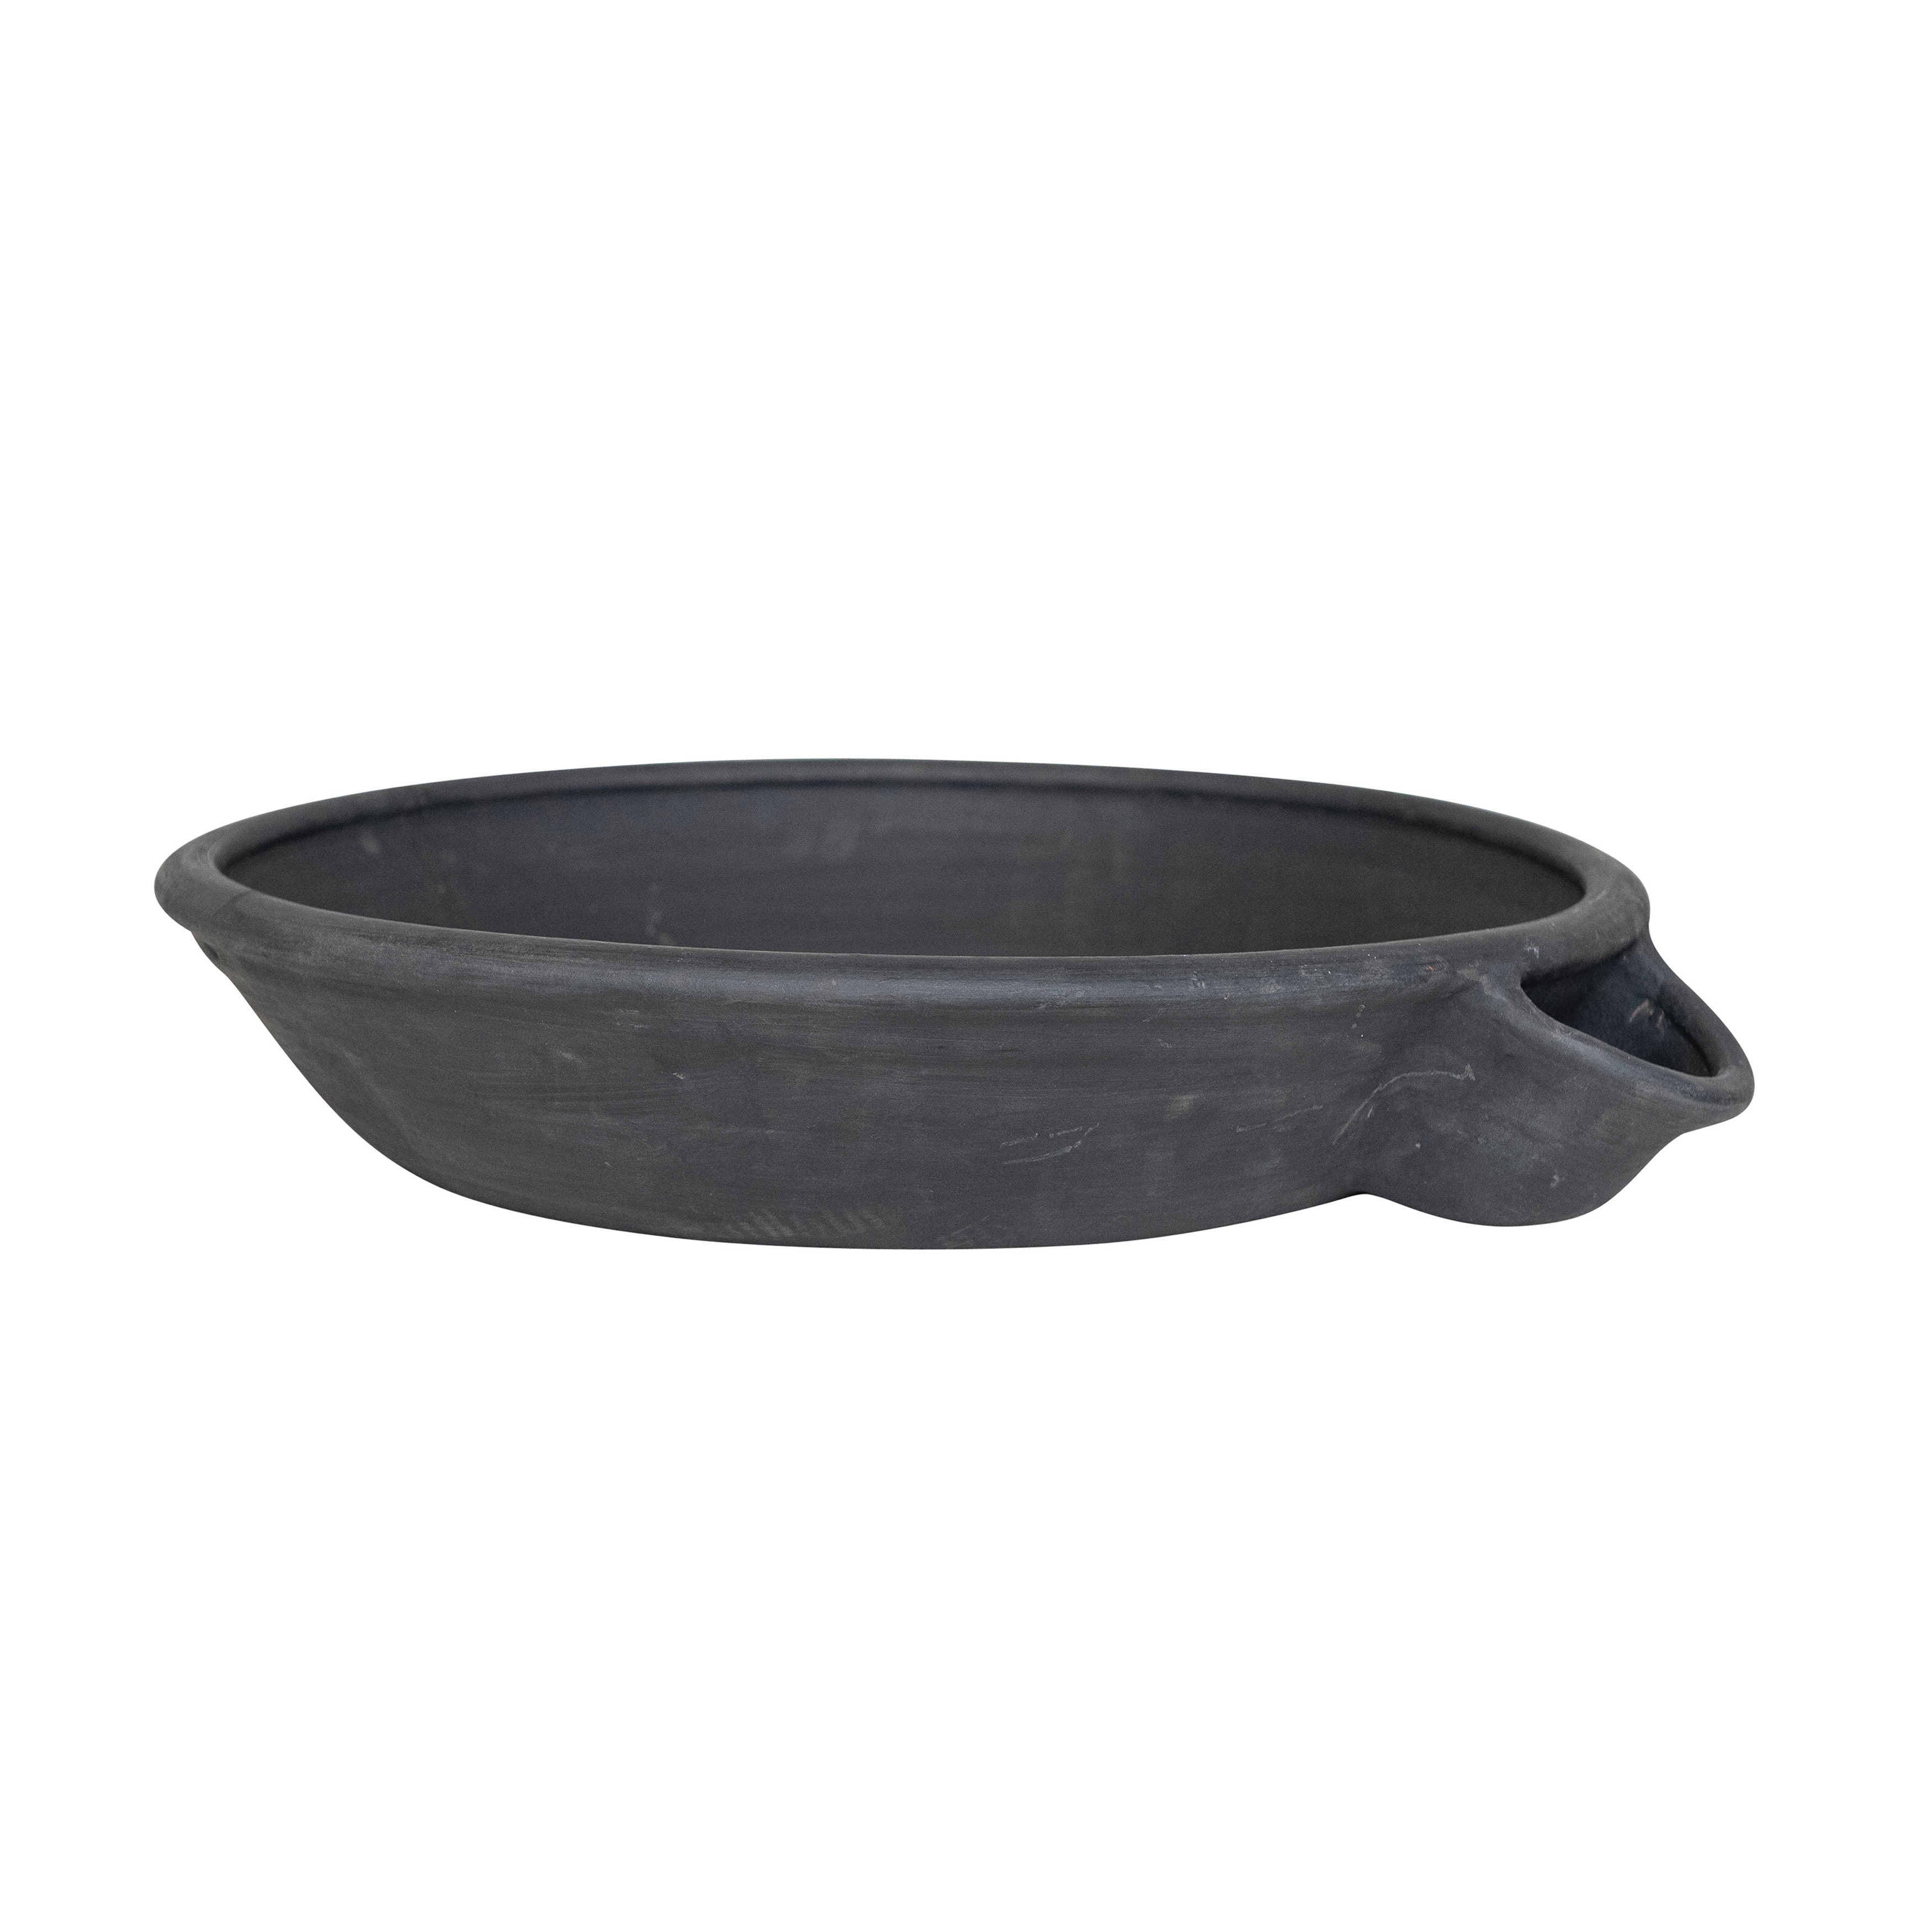 Large Decorative Vintage Clay Bowl with Handle for Storage, Black - Image 0